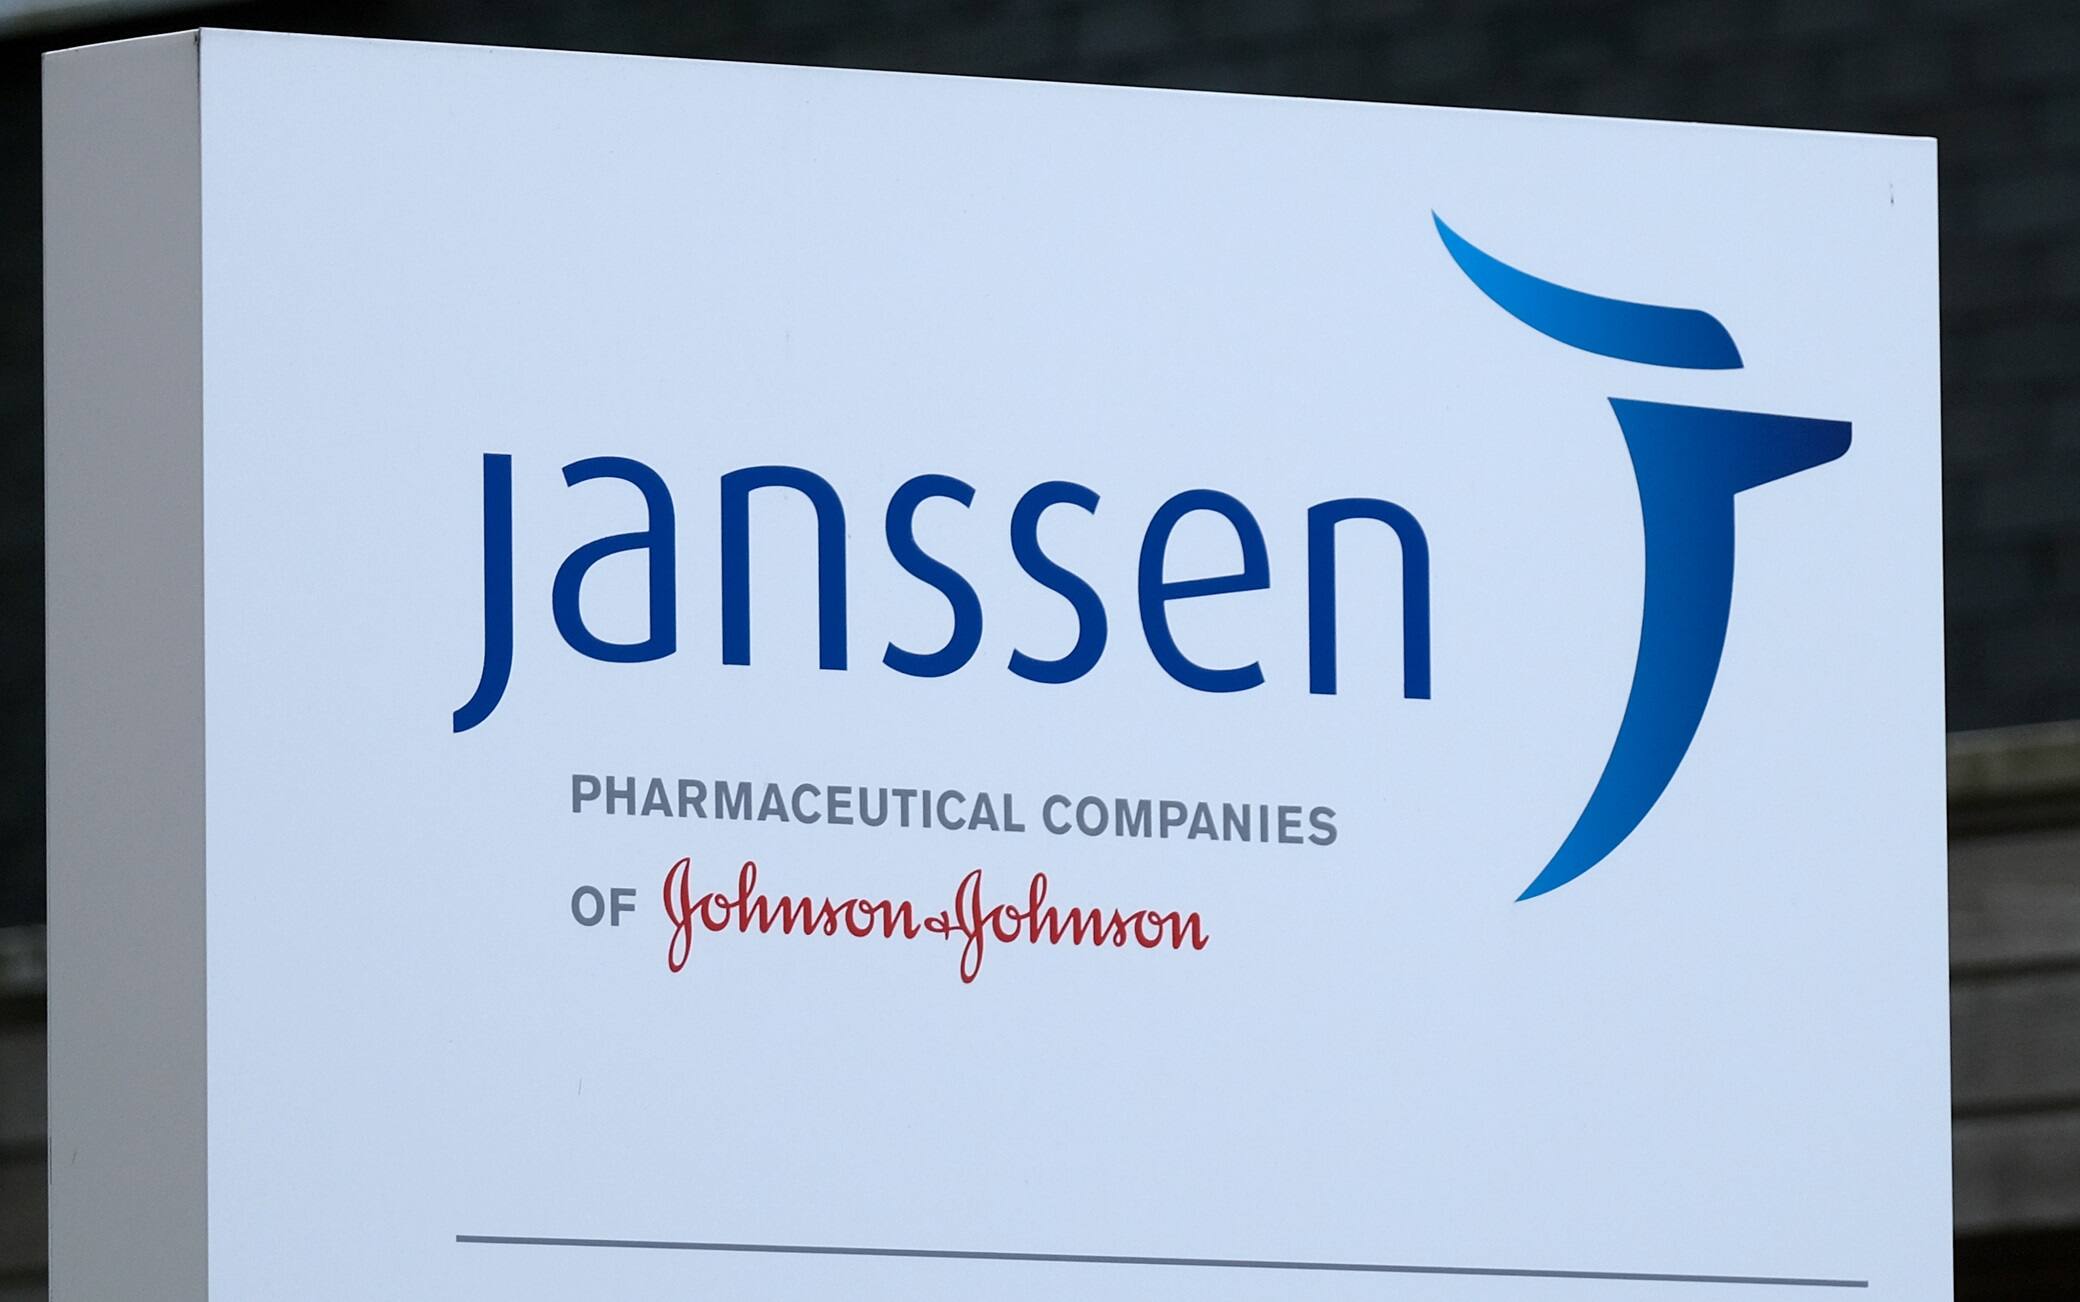 LEIDEN, NETHERLANDS - JUNE 9: A logo of Janssen Pharmaceutical Companies of Johnson & Johnson is pictured outside its facility on June 9, 2020 in Leiden, Netherlands.  (Photo by Yuriko Nakao/Getty Images)